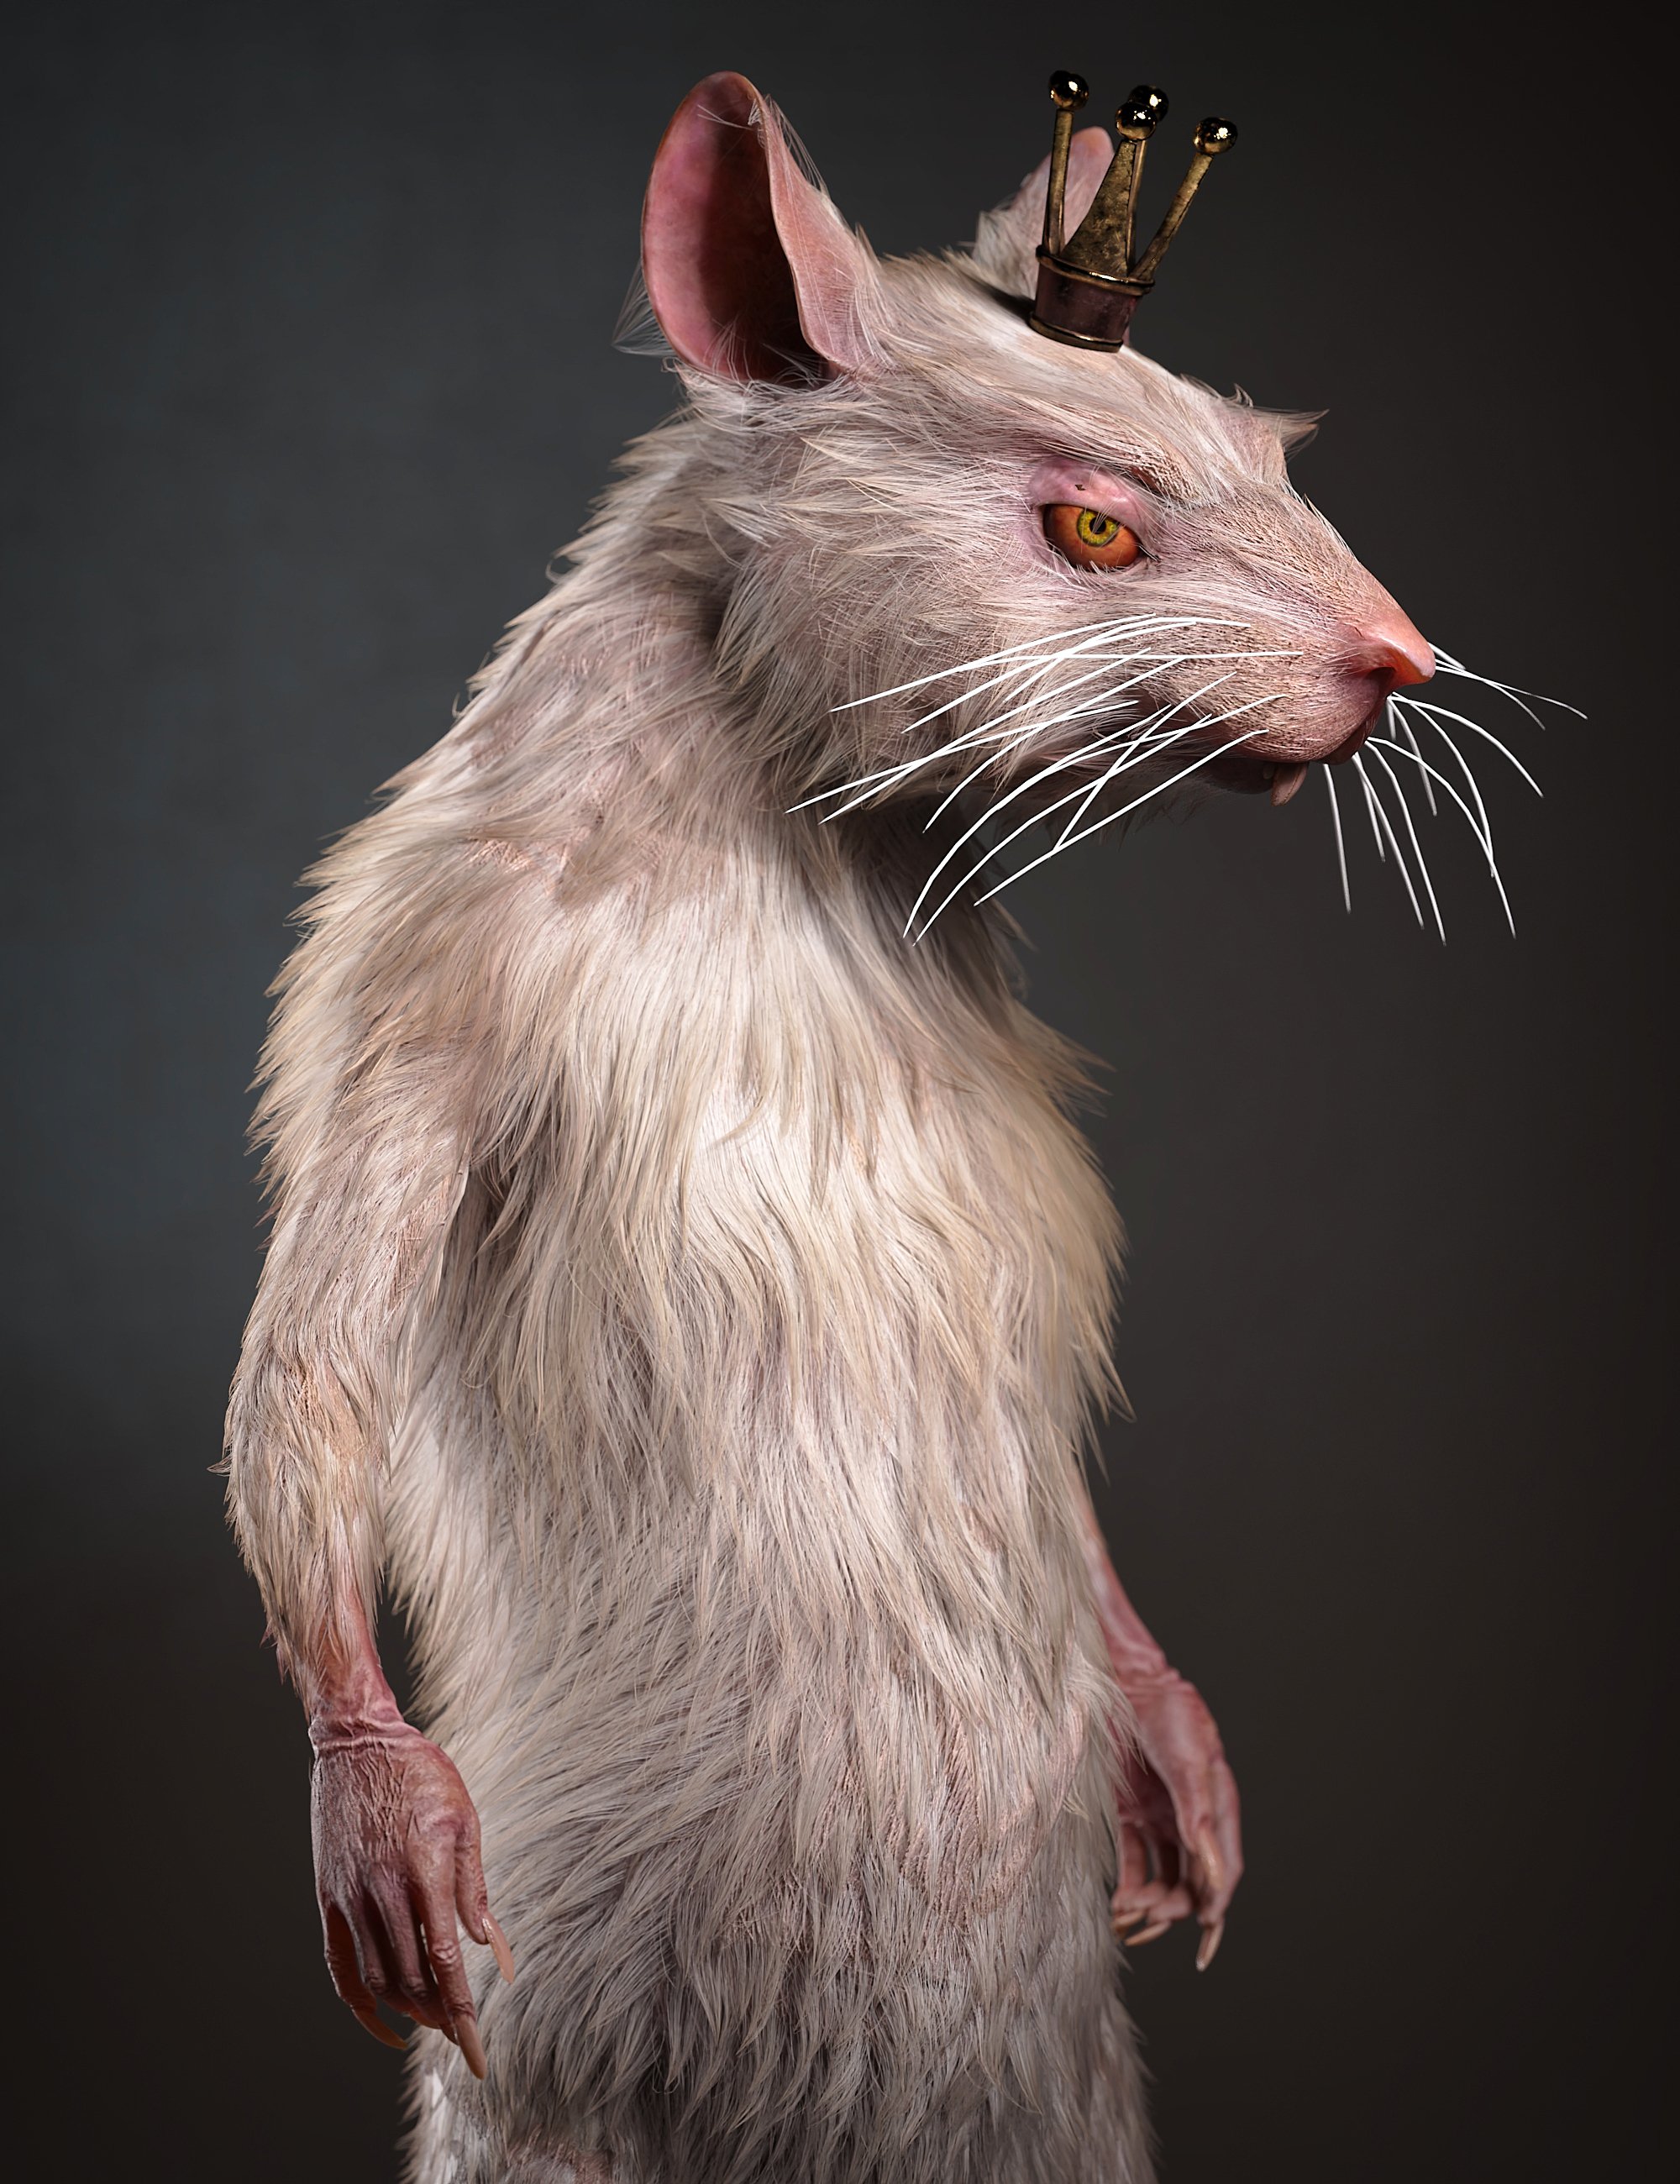 Mouse King for Genesis 8.1 Males